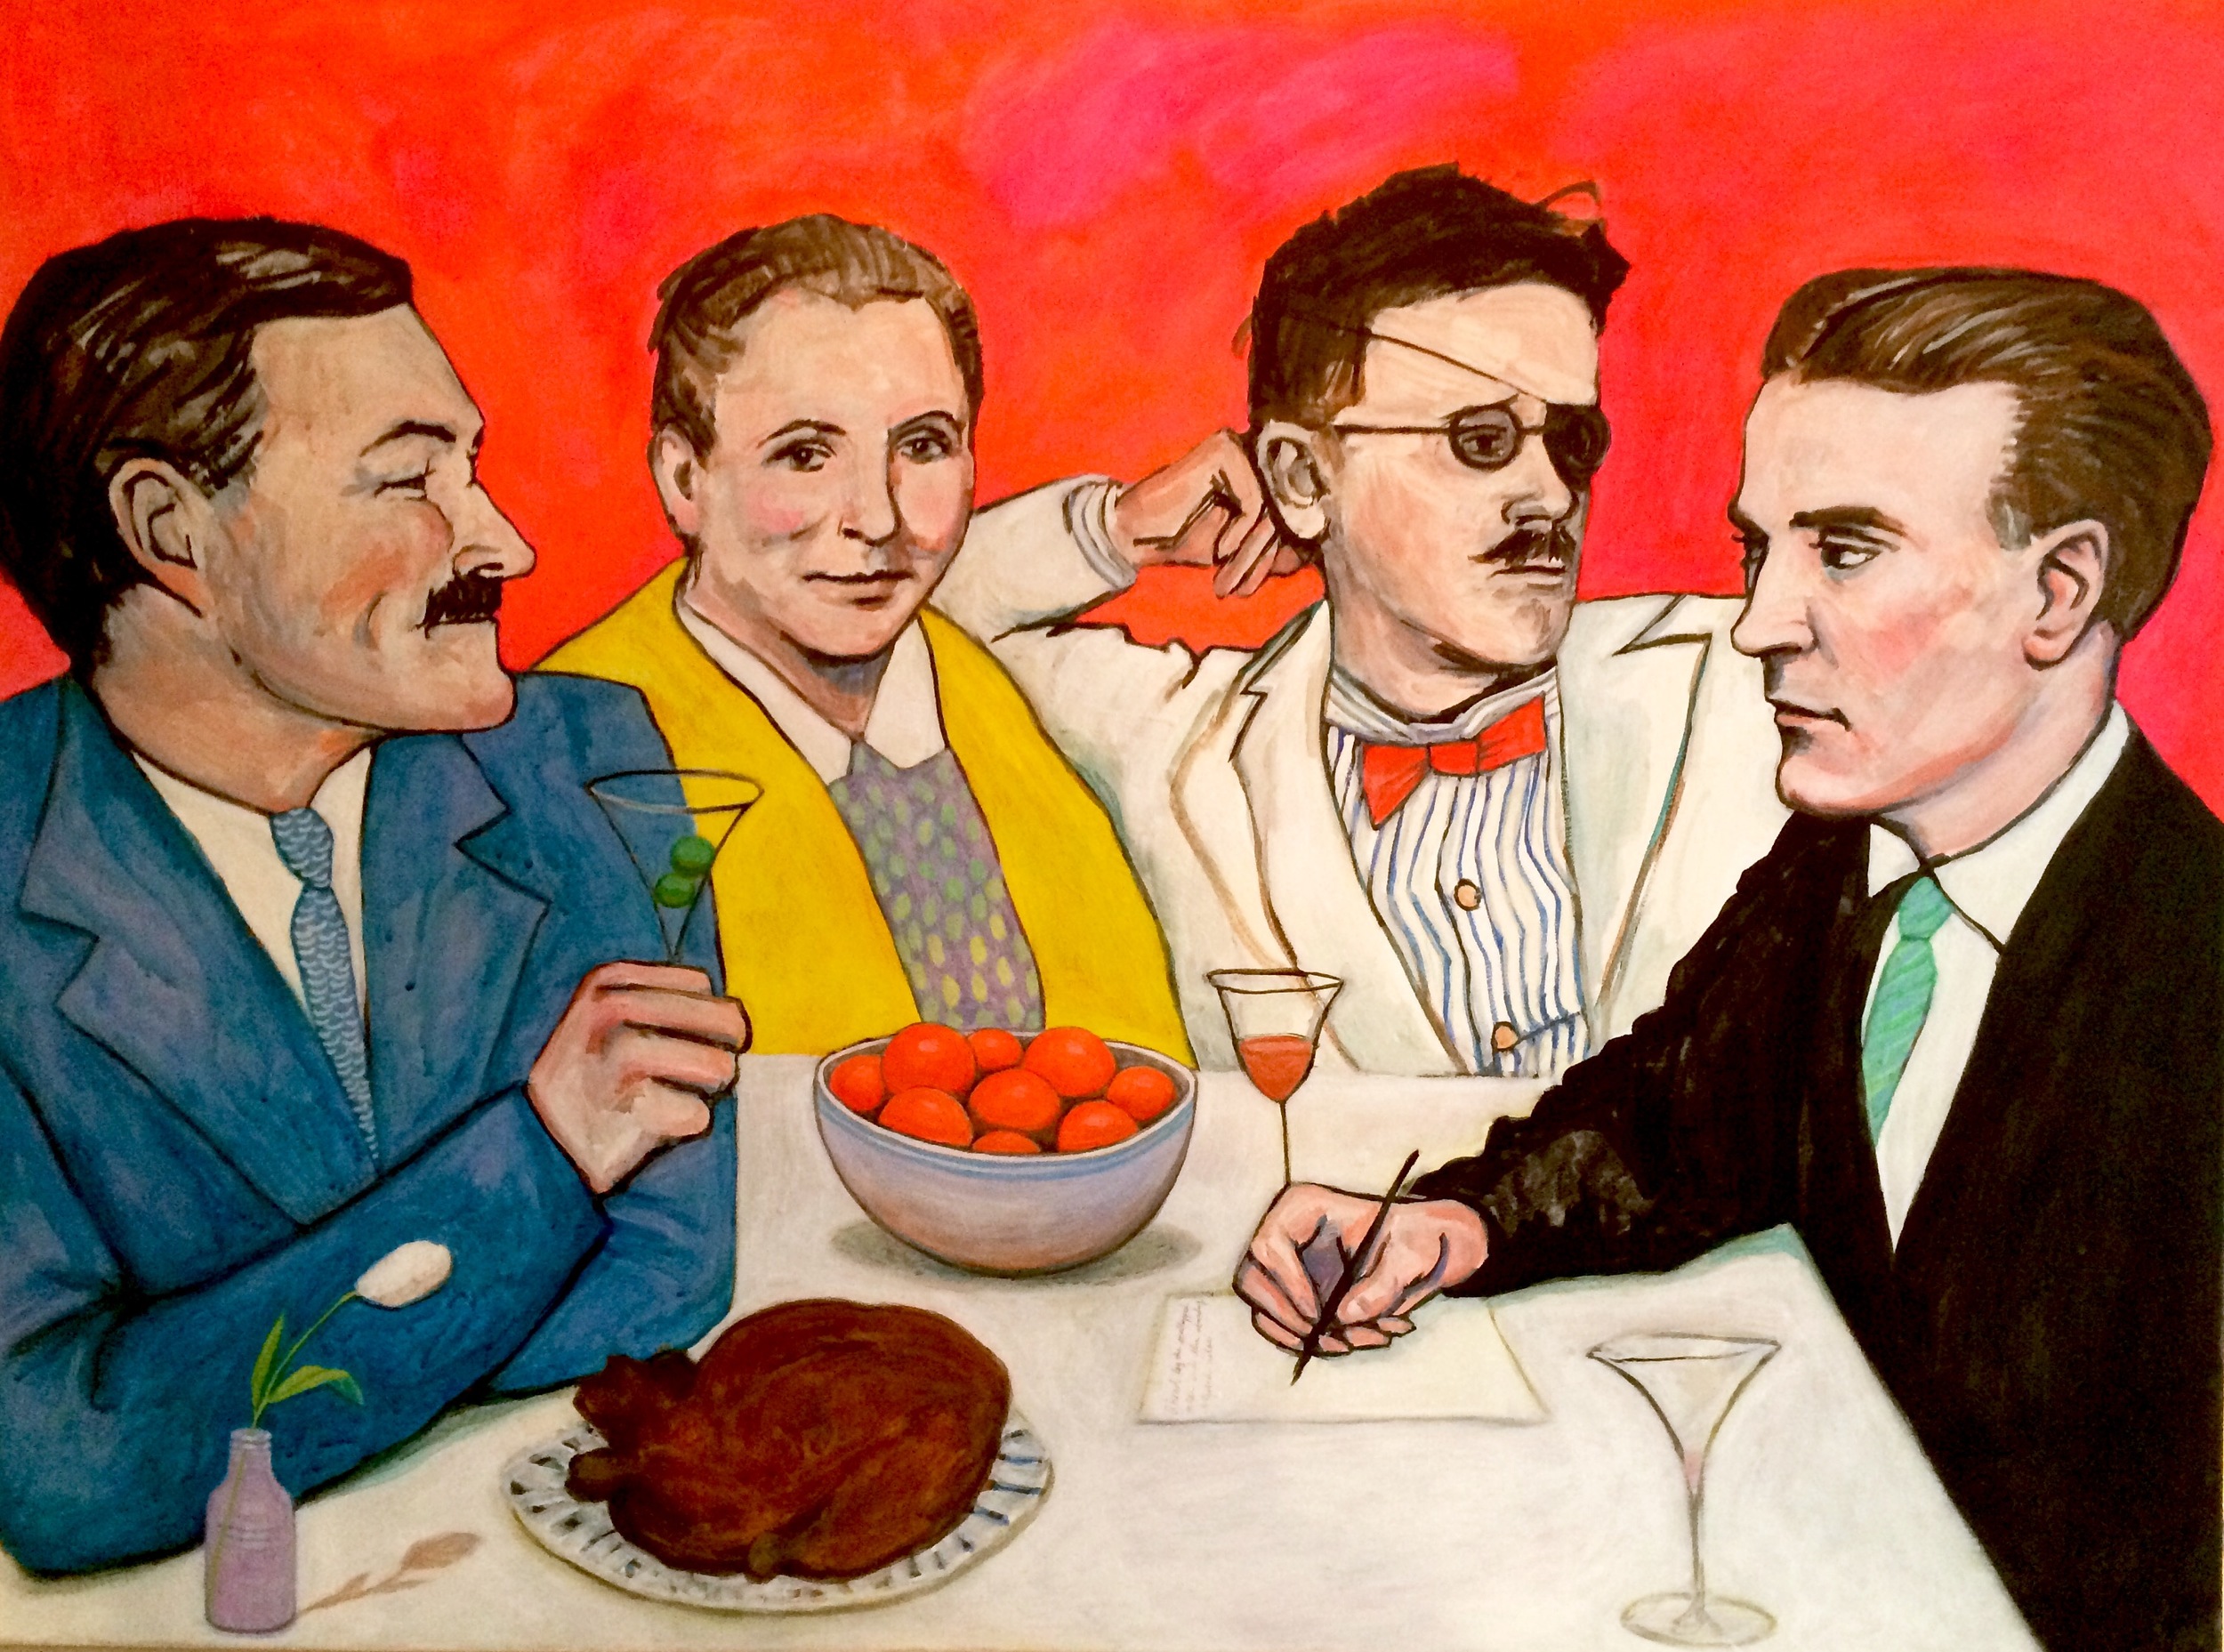   Spartans’ Feast: Ernest Hemingway, Gertrude Stein, James Joyce and F. Scott Fitzgerald   acrylic, gouache, and watercolor on canvas, 30 x 40 inches, 2016   (sold)  